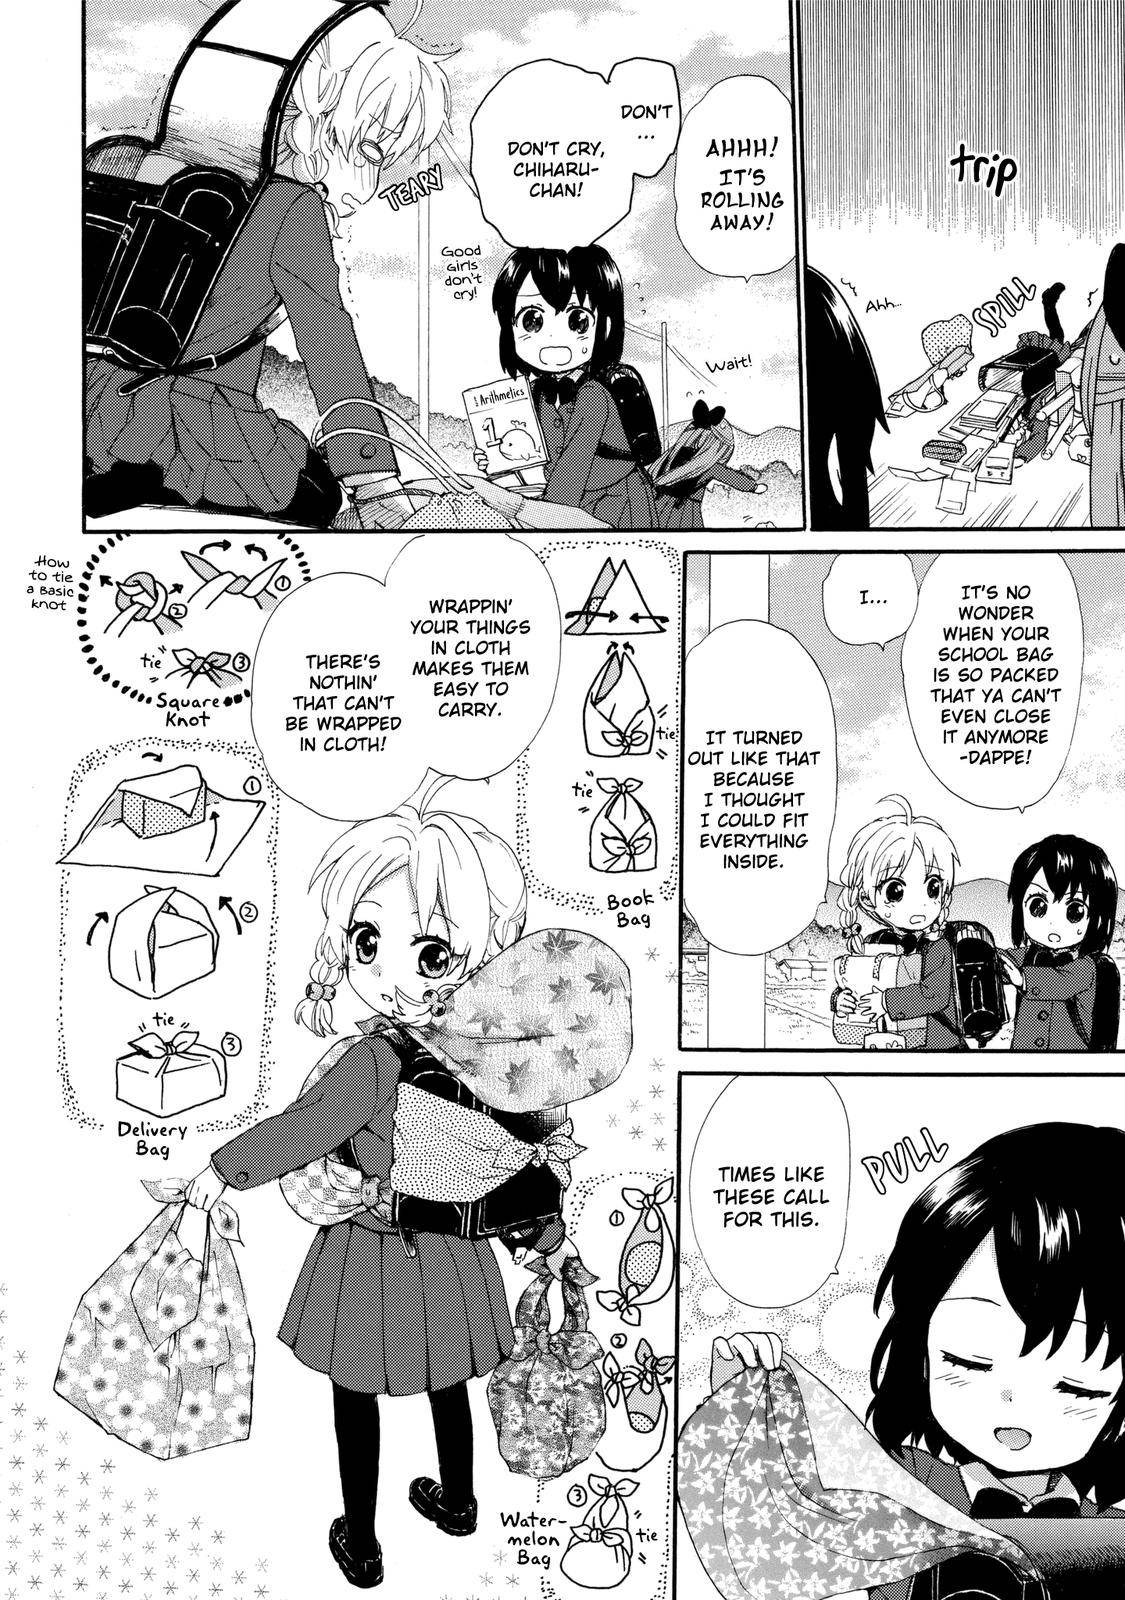 The Cute Little Granny Girl Hinata-chan - chapter 39 - #4